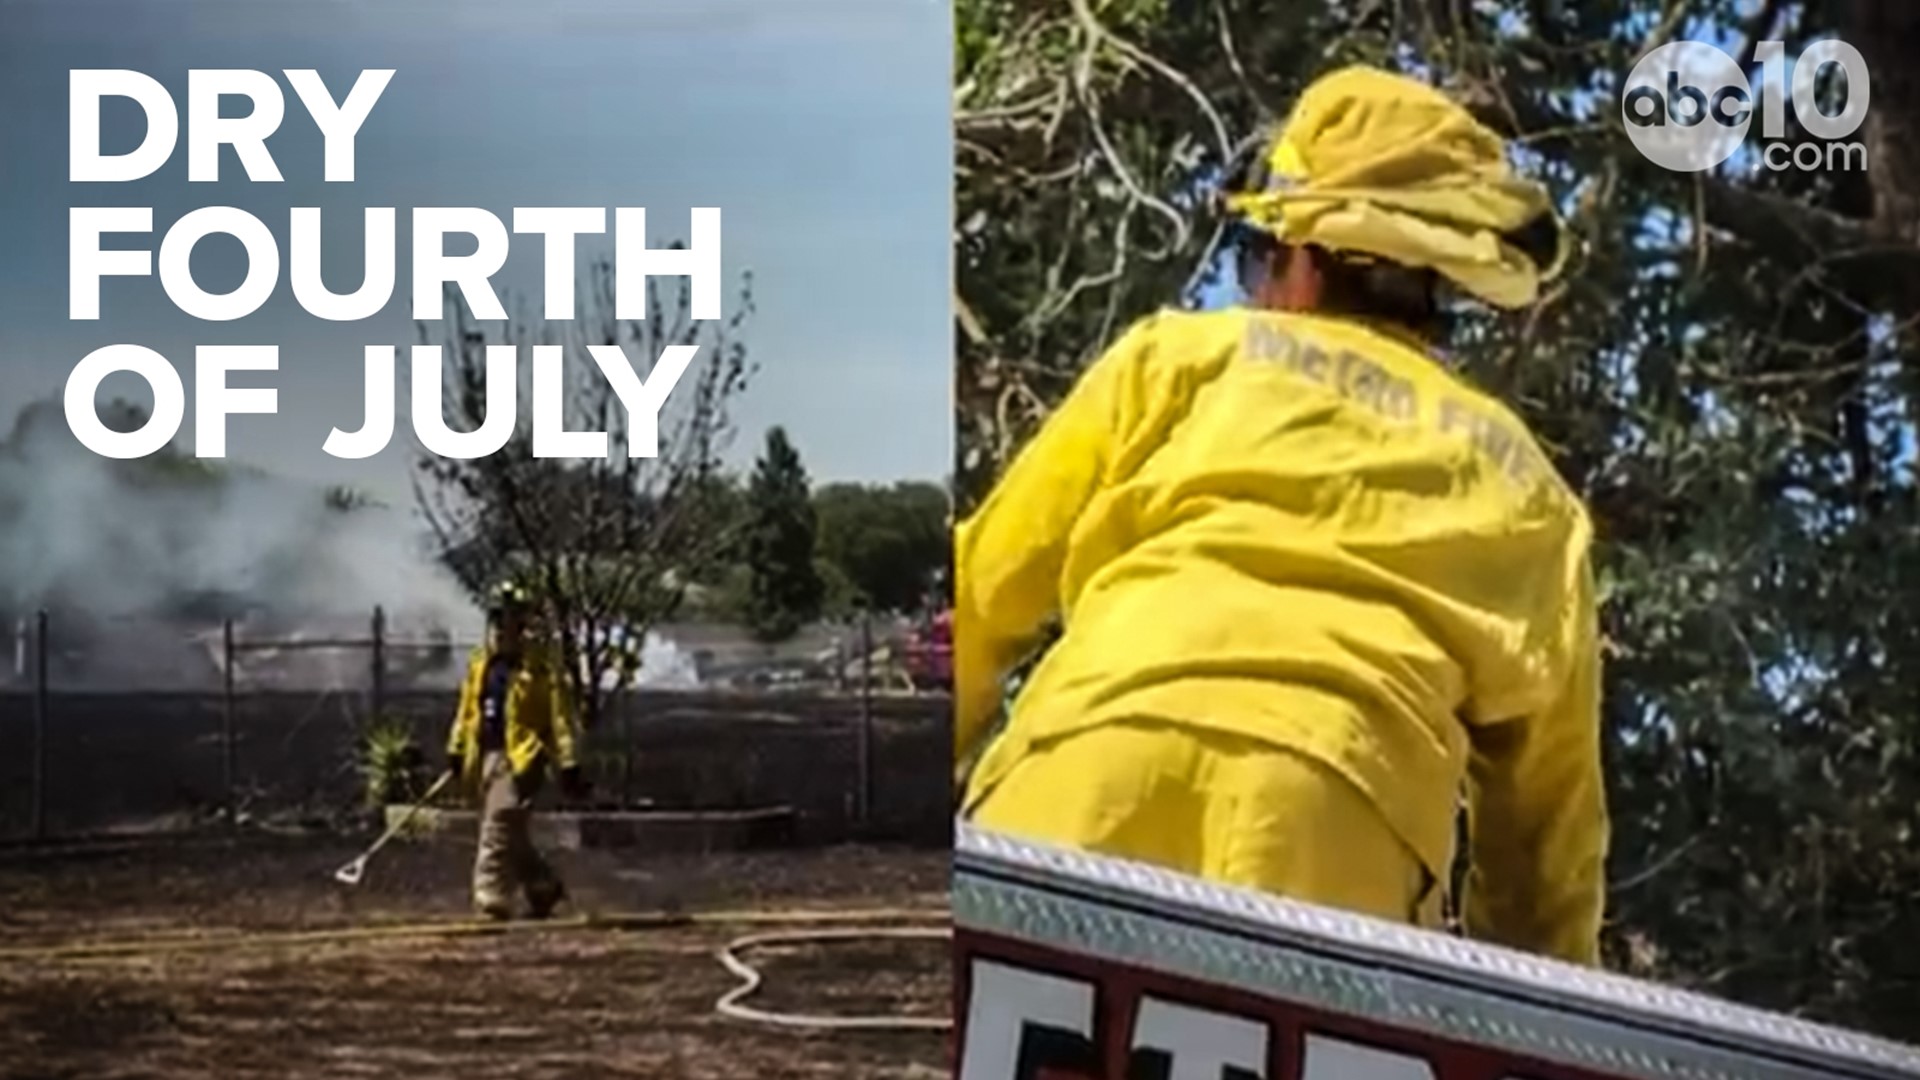 Illegal fireworks have caused many fires across Fourth of July weekends, but California Fire (CALFIRE) officials say this weekend will be hot and dry.